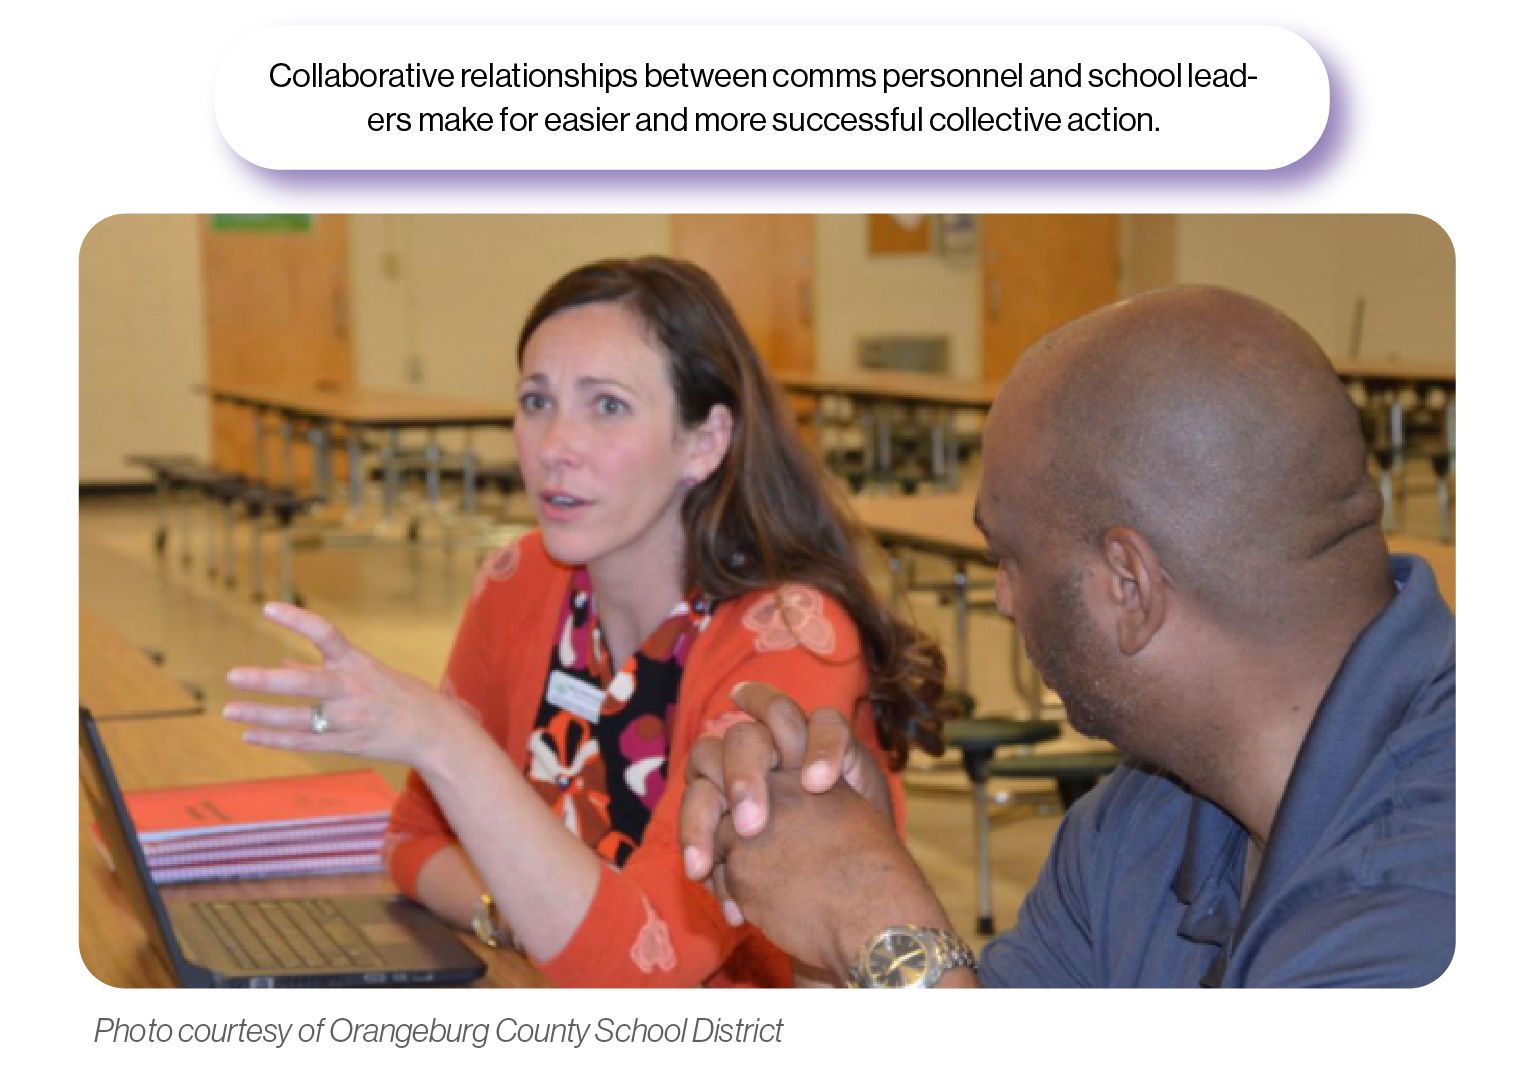 Image: Merry Glenne Piccolino, Orangeburg County School District's Assistant Superintendent for Communications, talks with someone in a school cafeteria with the SchoolCEO caption 'Collaborative relationships between comms personnel and school leaders make for easier and more successful collective action.'